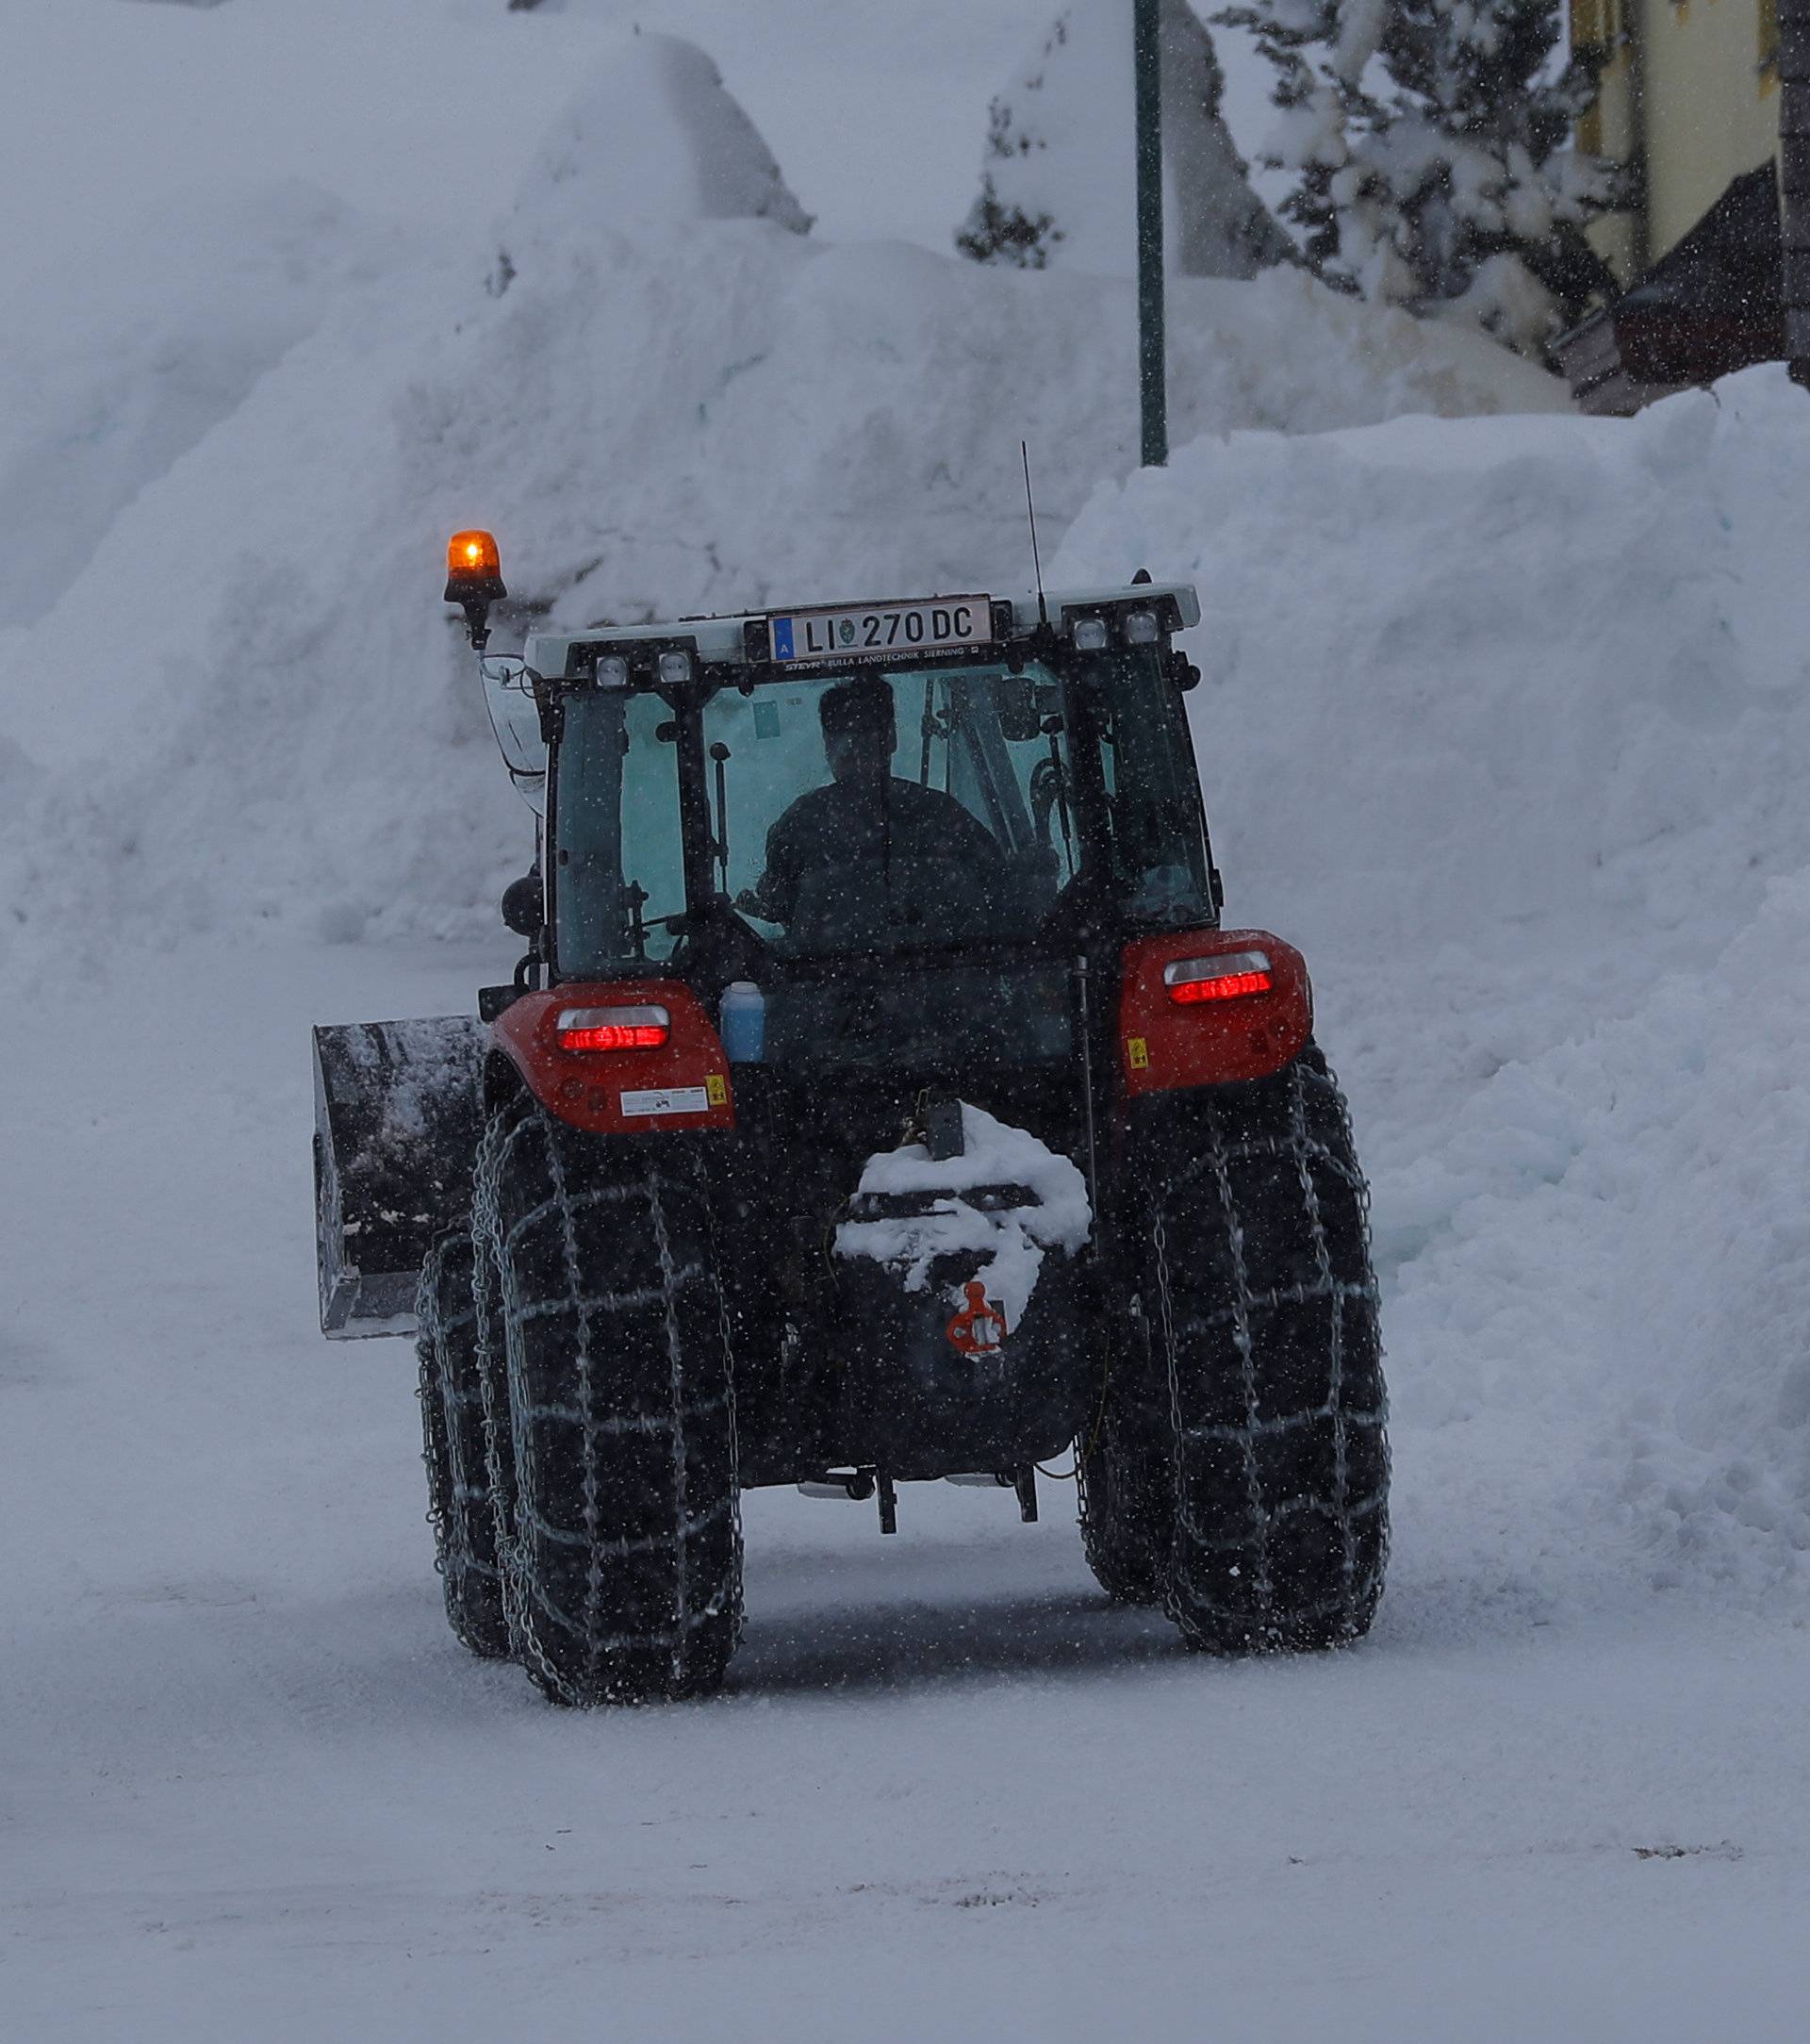 A tractor shovels snow on an icy road after heavy snowfall in Knoppen